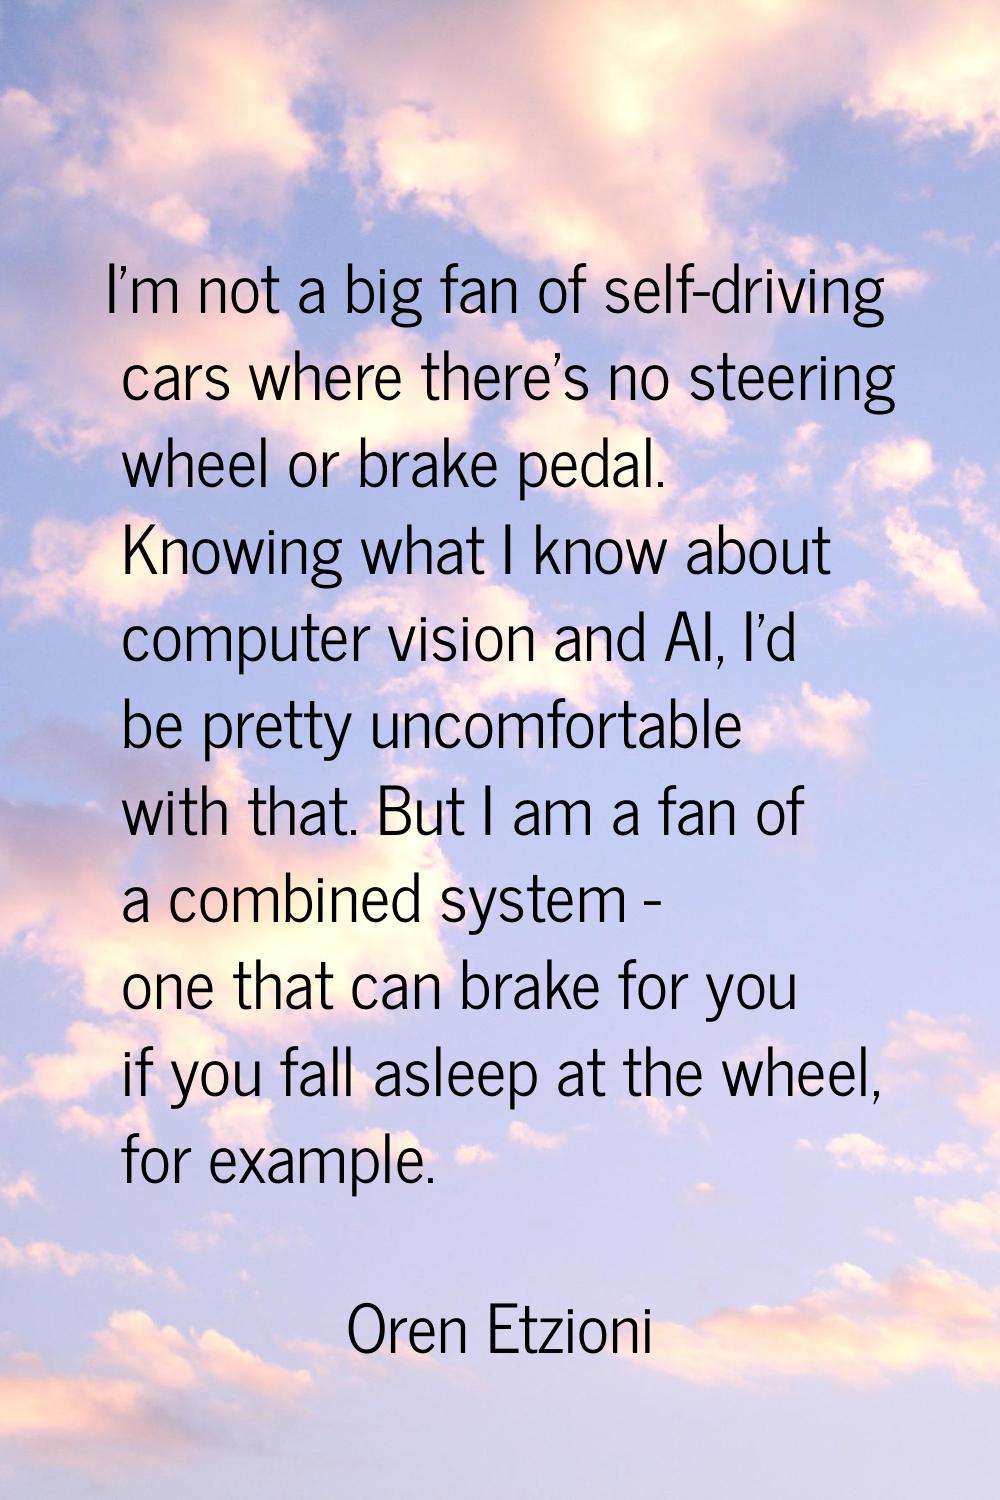 I'm not a big fan of self-driving cars where there's no steering wheel or brake pedal. Knowing what